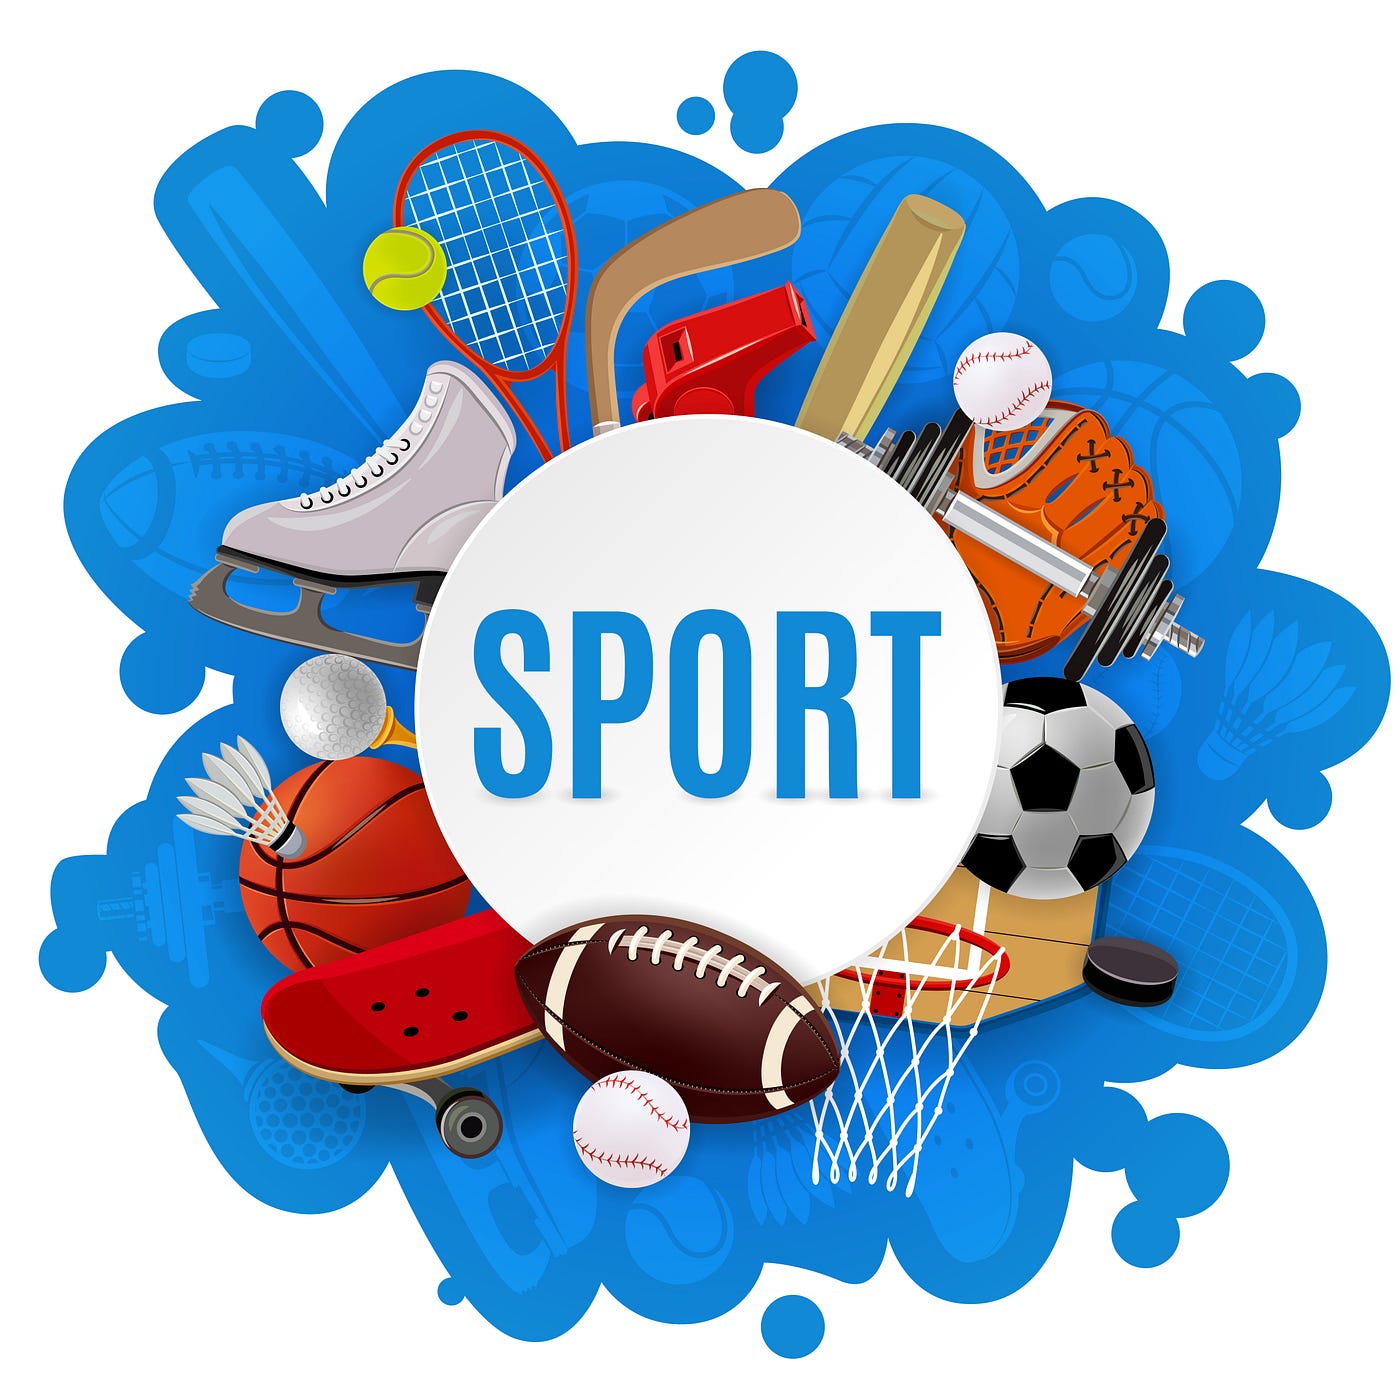 Sports equipment giveaway promotions